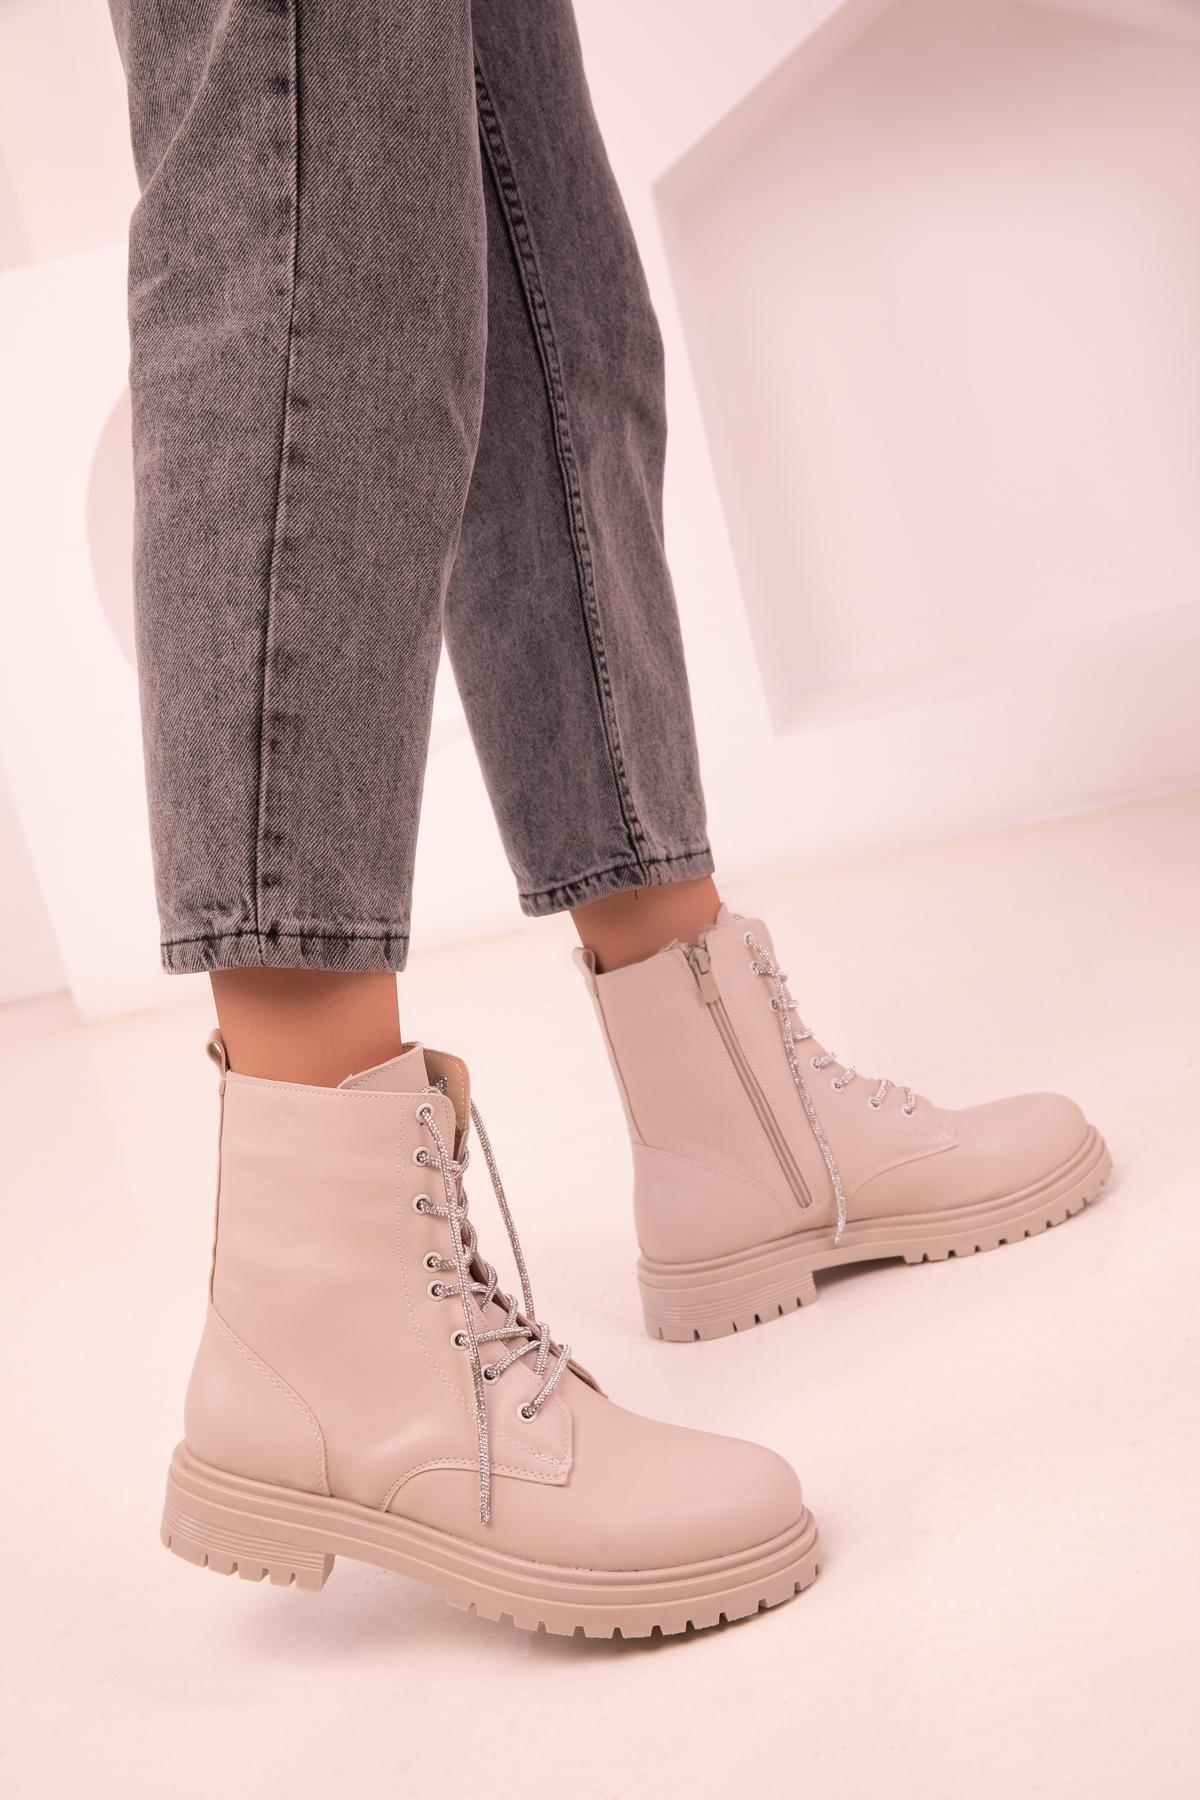 SOHO - Beige Lace-Up Ankle Boots